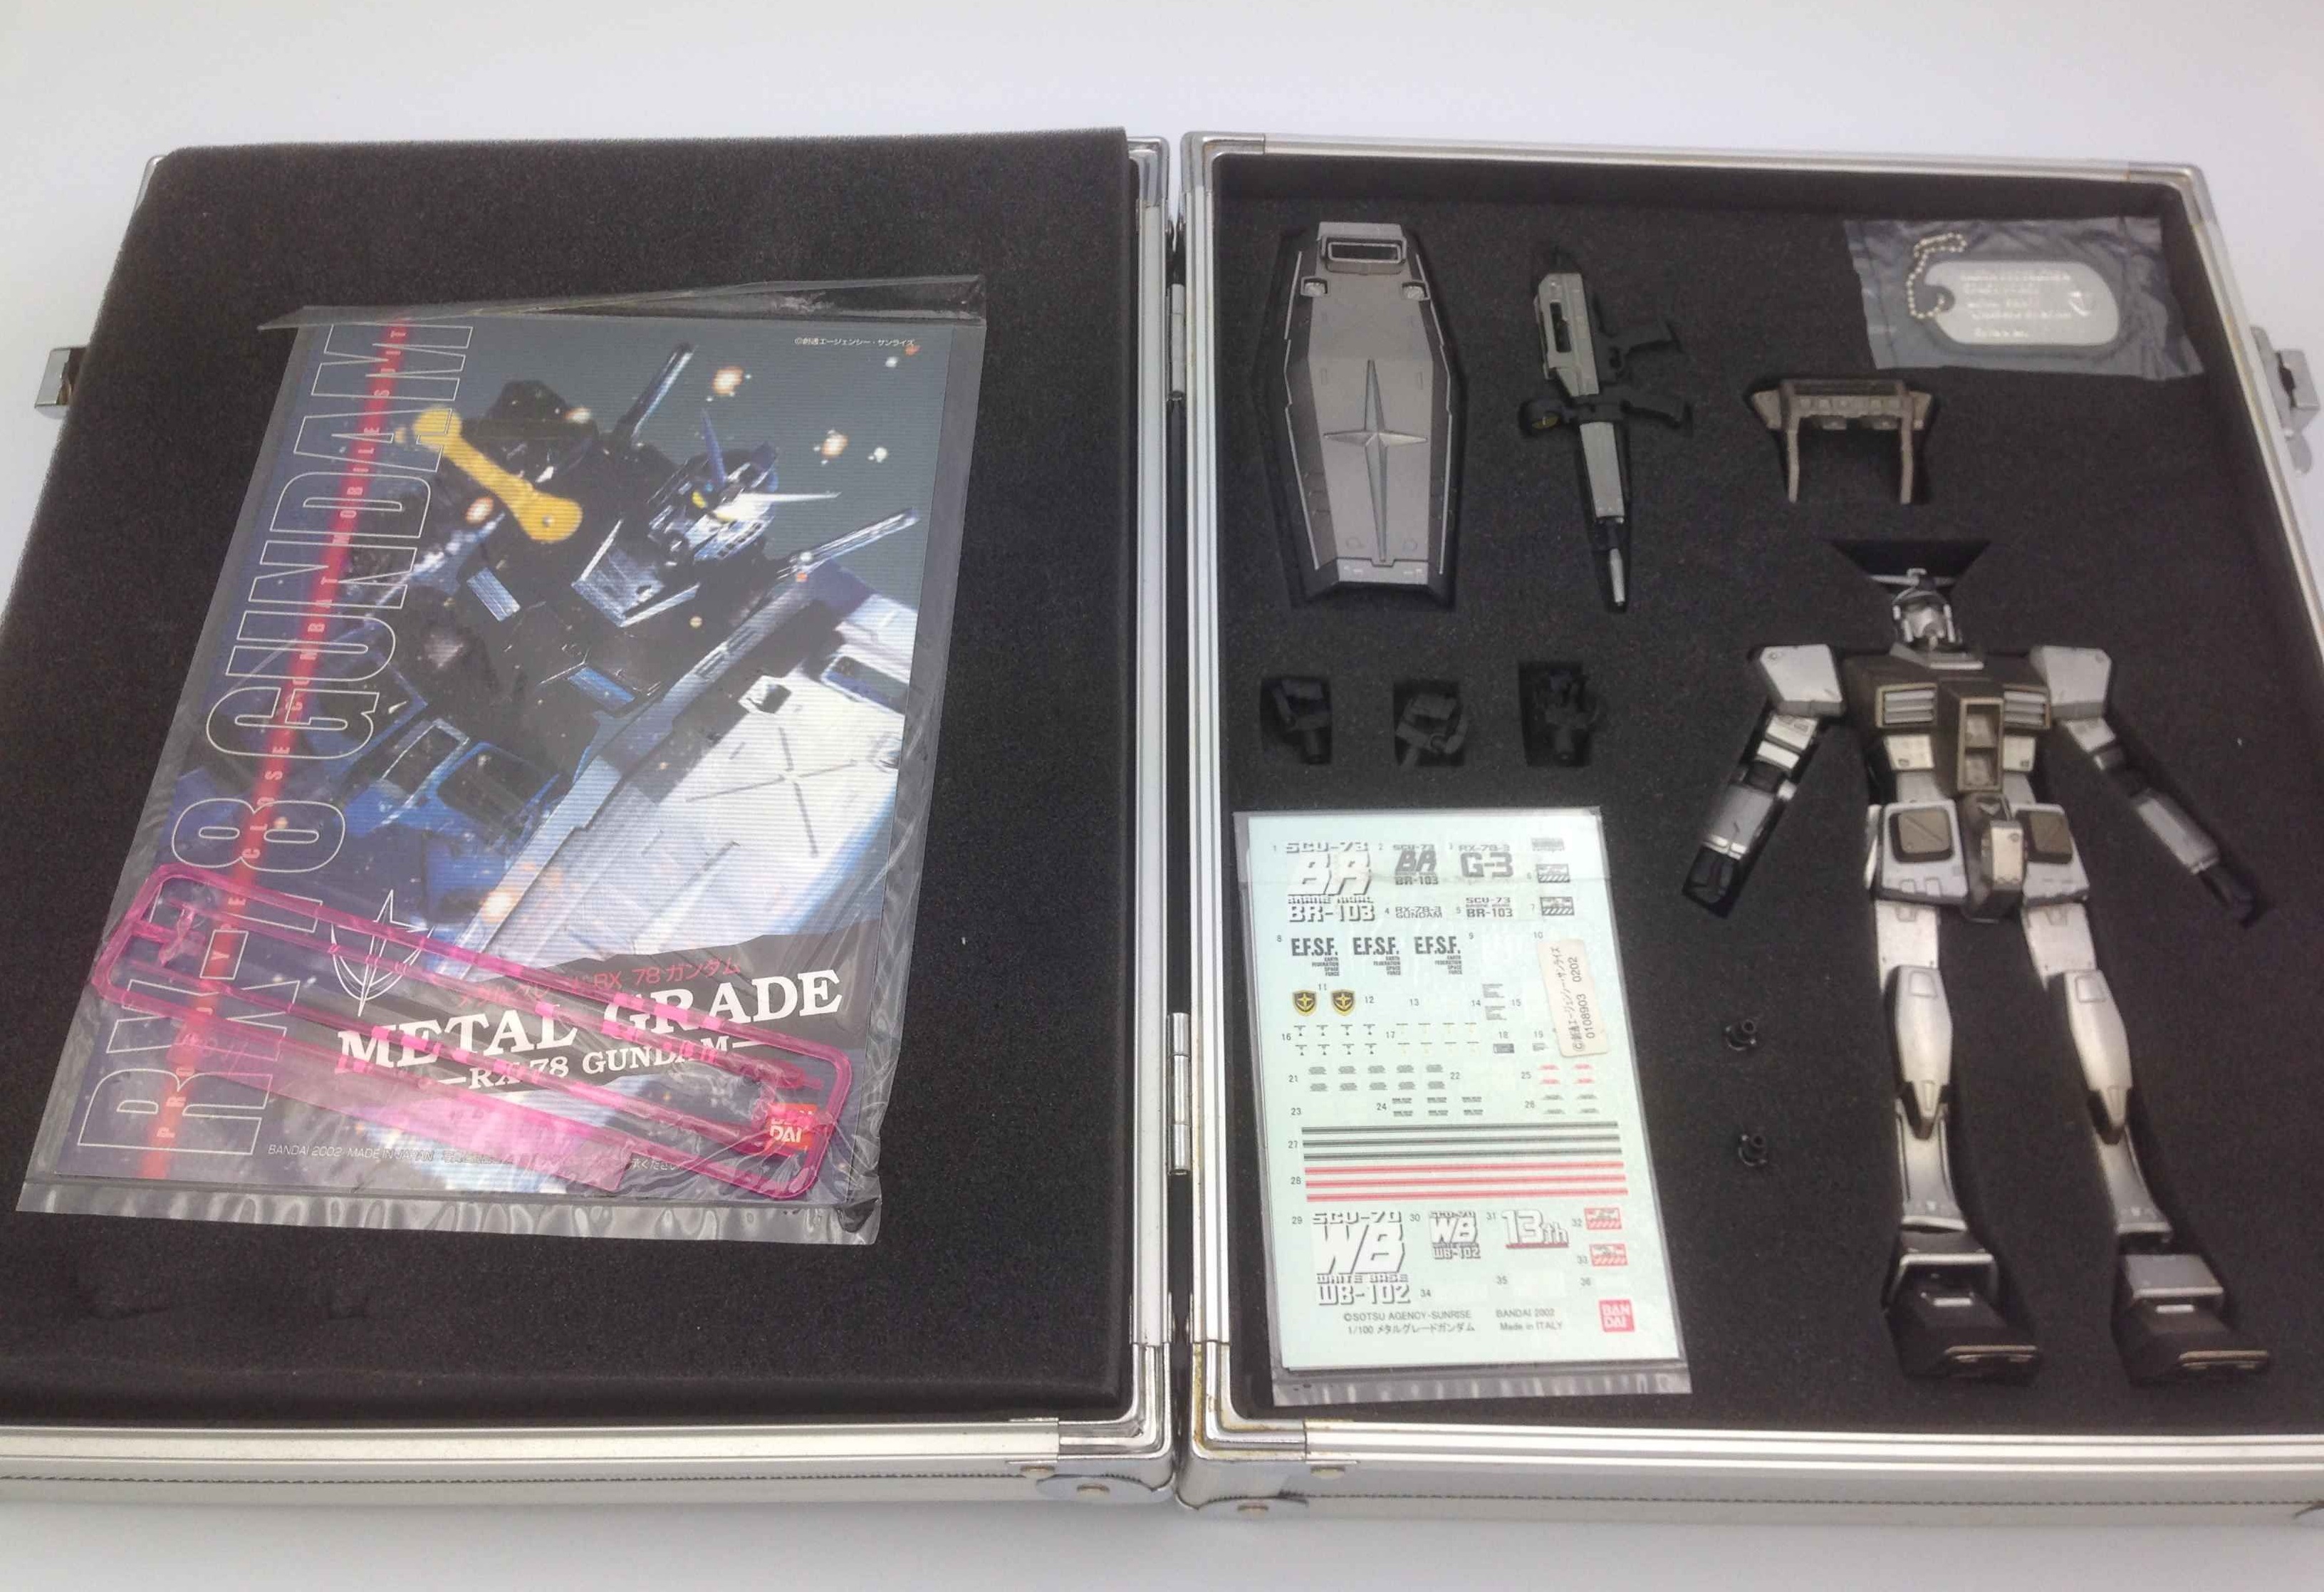 1/100 METAL GRADE RX-78 Gundam: BOX OPEN and Full Photo Review. A 